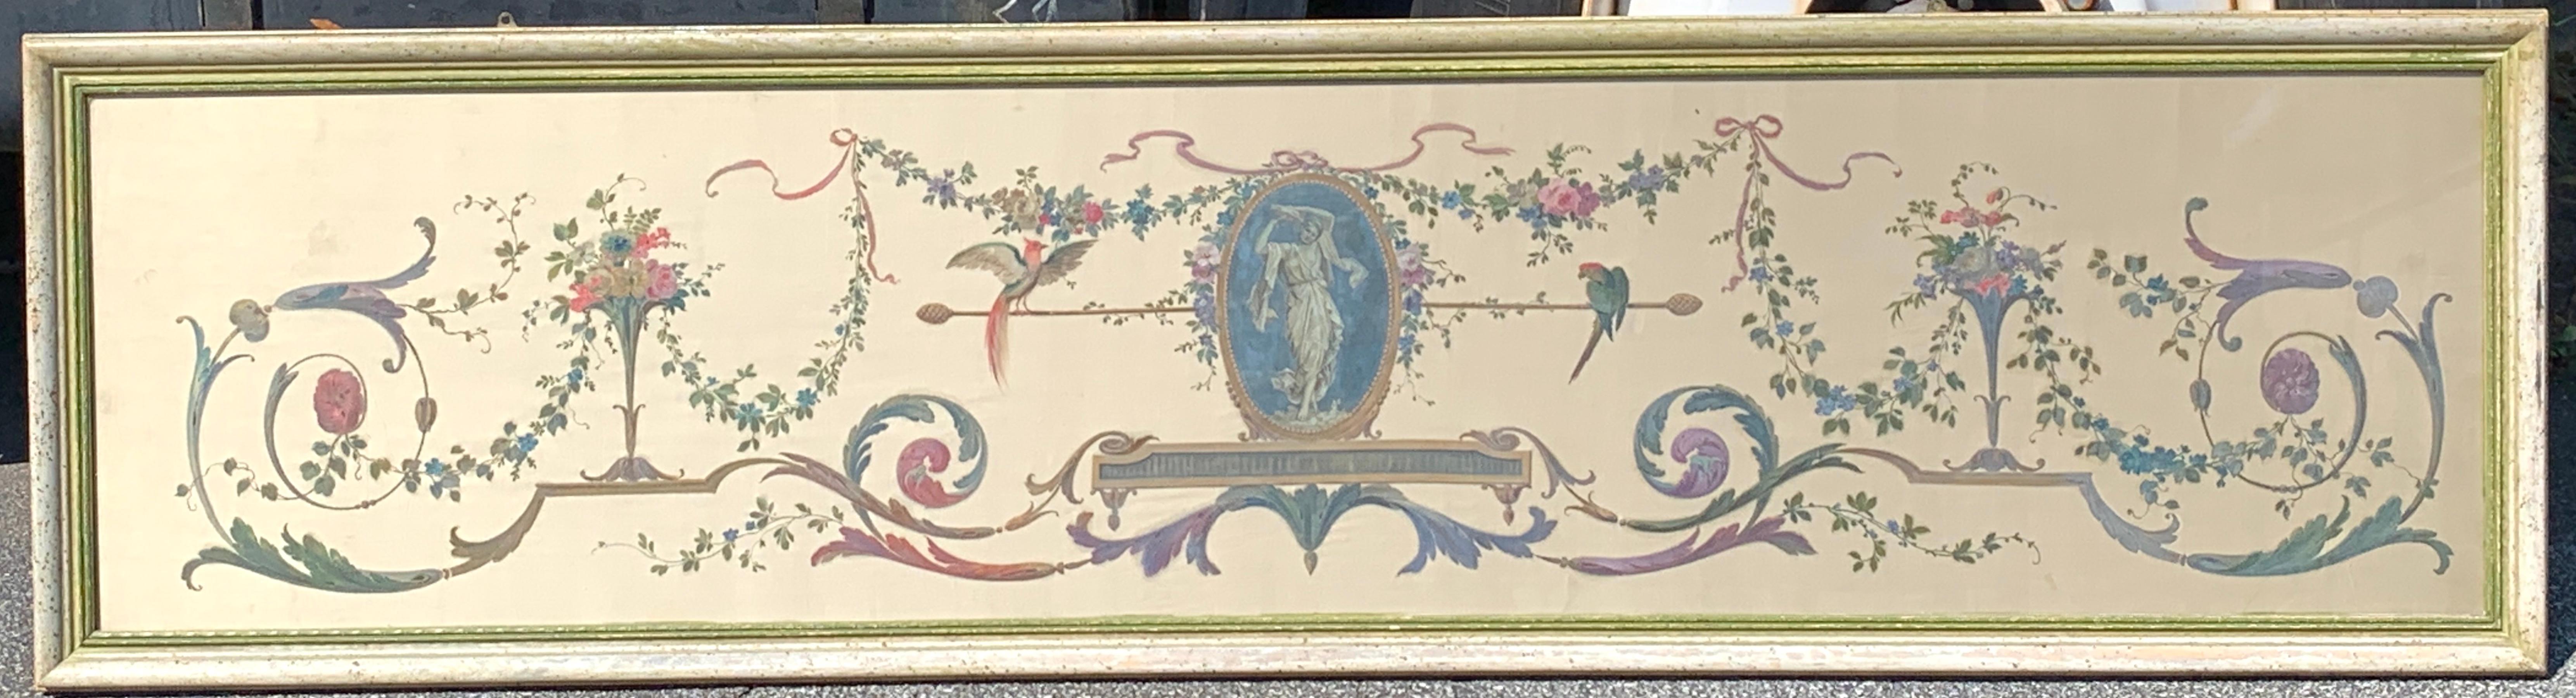 Robert Adam style painted interior architectural panel, framed
of substantial size, hand painted on fine silk, well executed typical Adam decoration in fine muted colors, perfect to hang above a doorway/ entrance or any other suitable